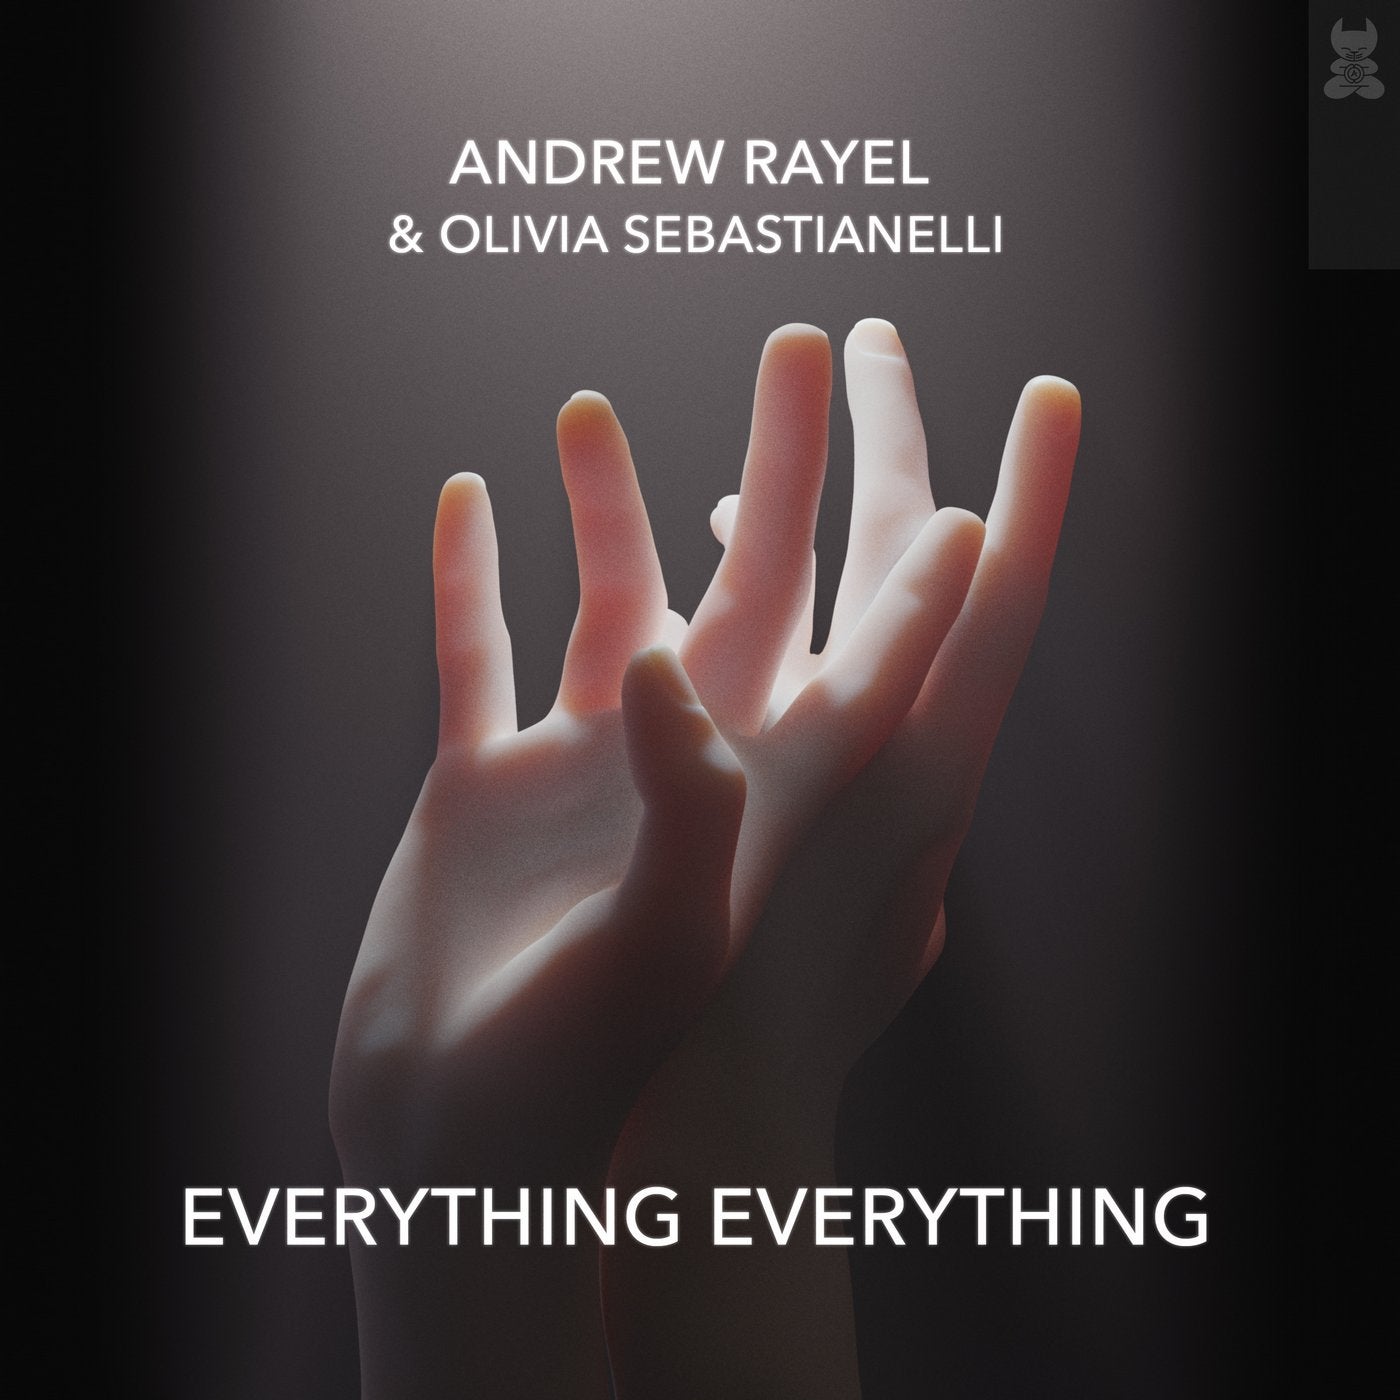 Everything everything live. Olivia Sebastianelli. Andrew Rayel ft. Olivia Sebastianelli - everything everything (Extended Mix) Дата релиза. Everything. Andrew Rayel.